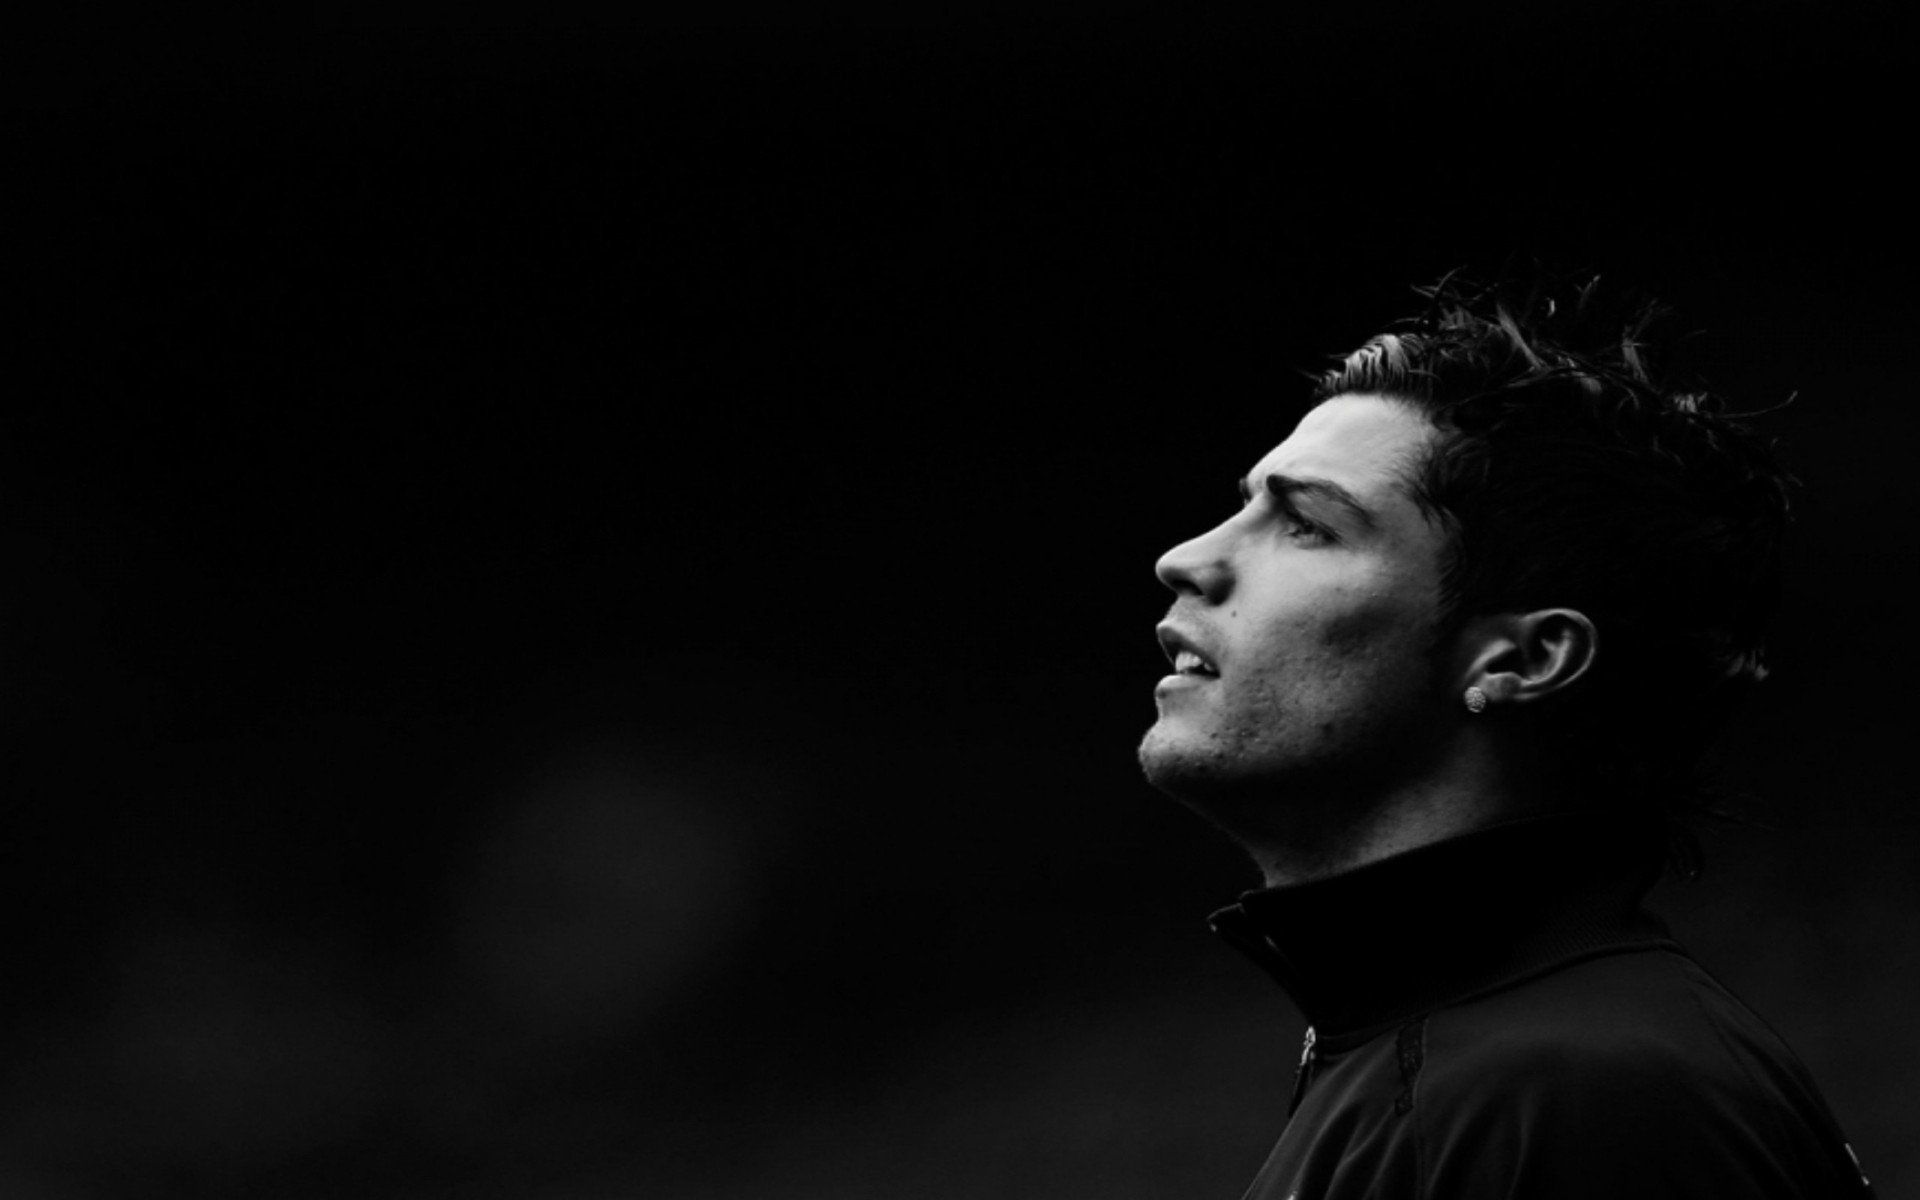 Ronaldo 4K wallpaper for your desktop or mobile screen free and easy to download